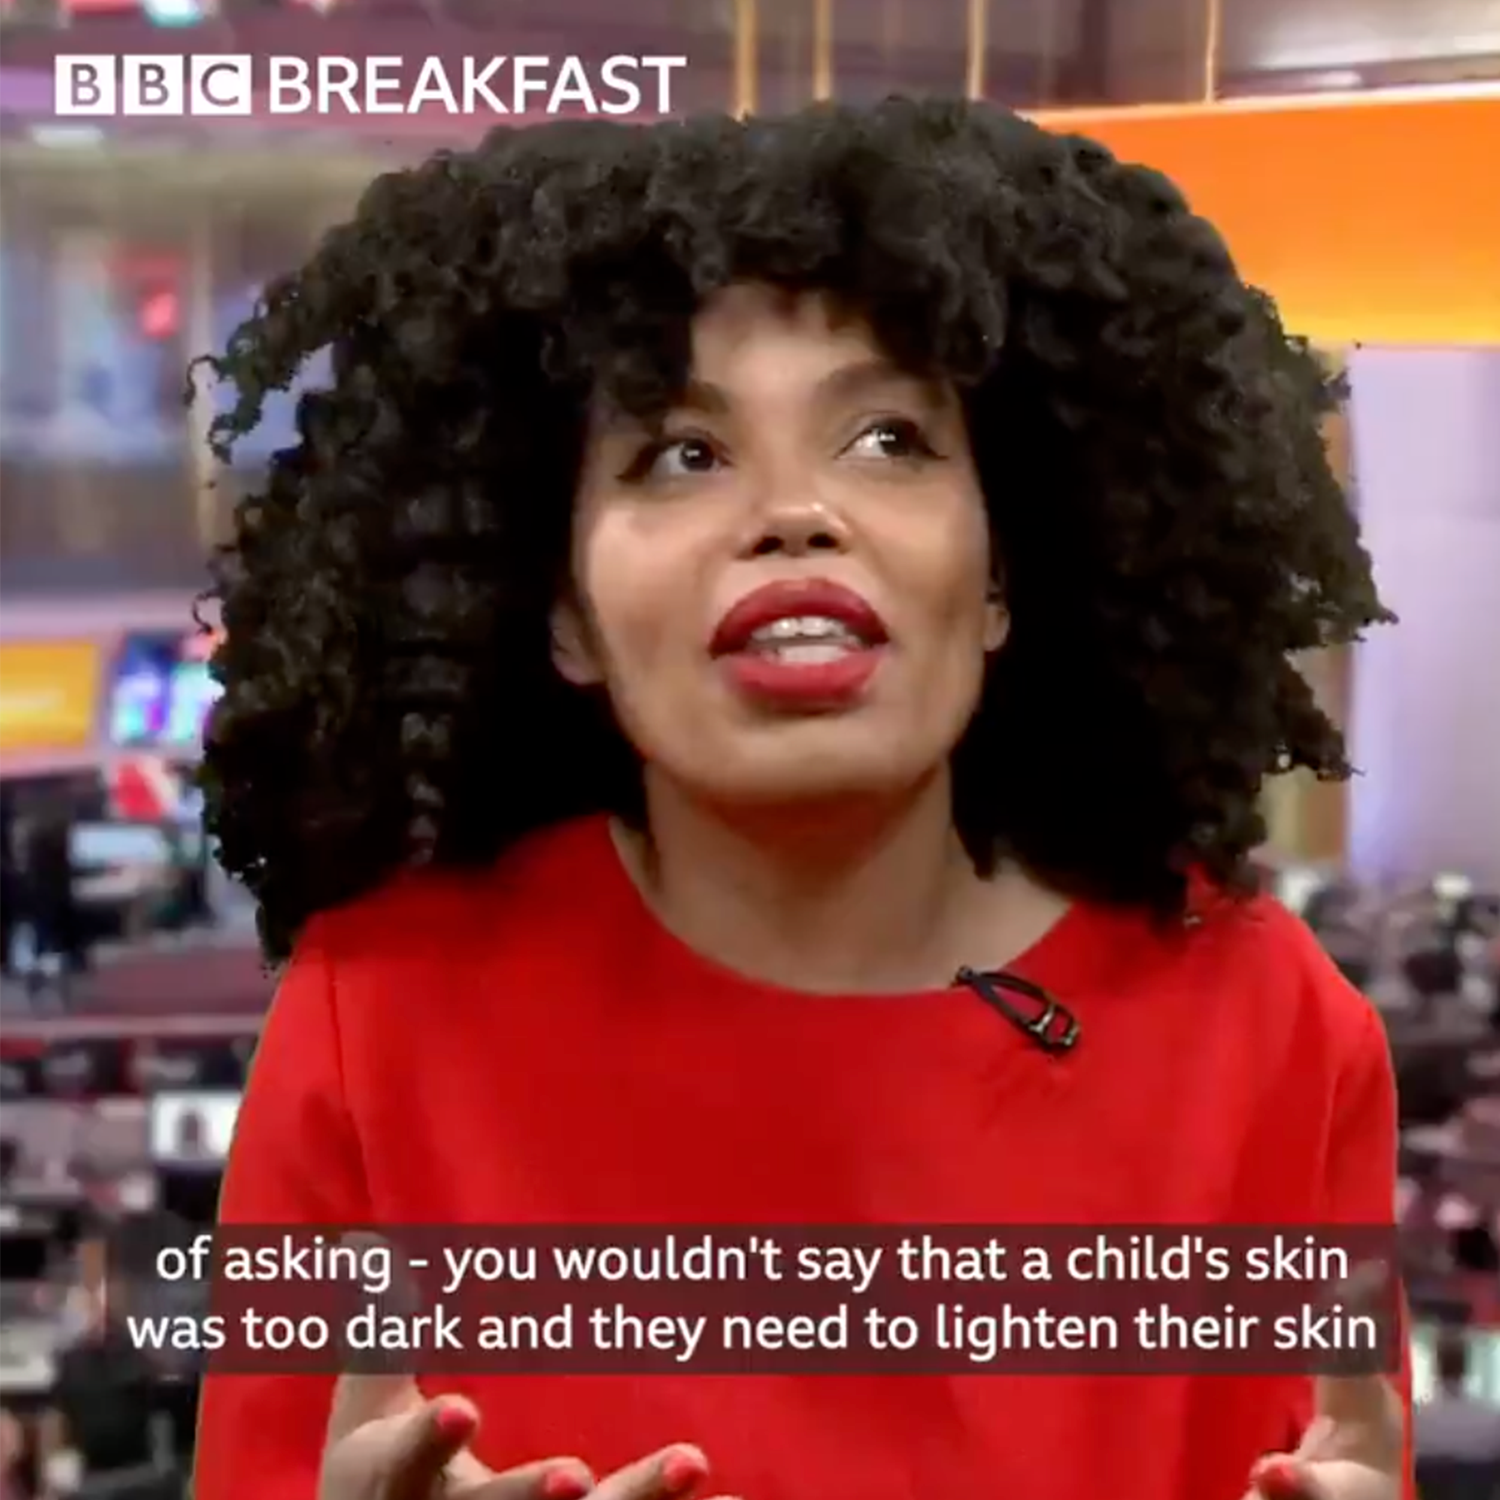 Emma Dabiri on BBC Breakfast calling for legal protections for afro-textured hair